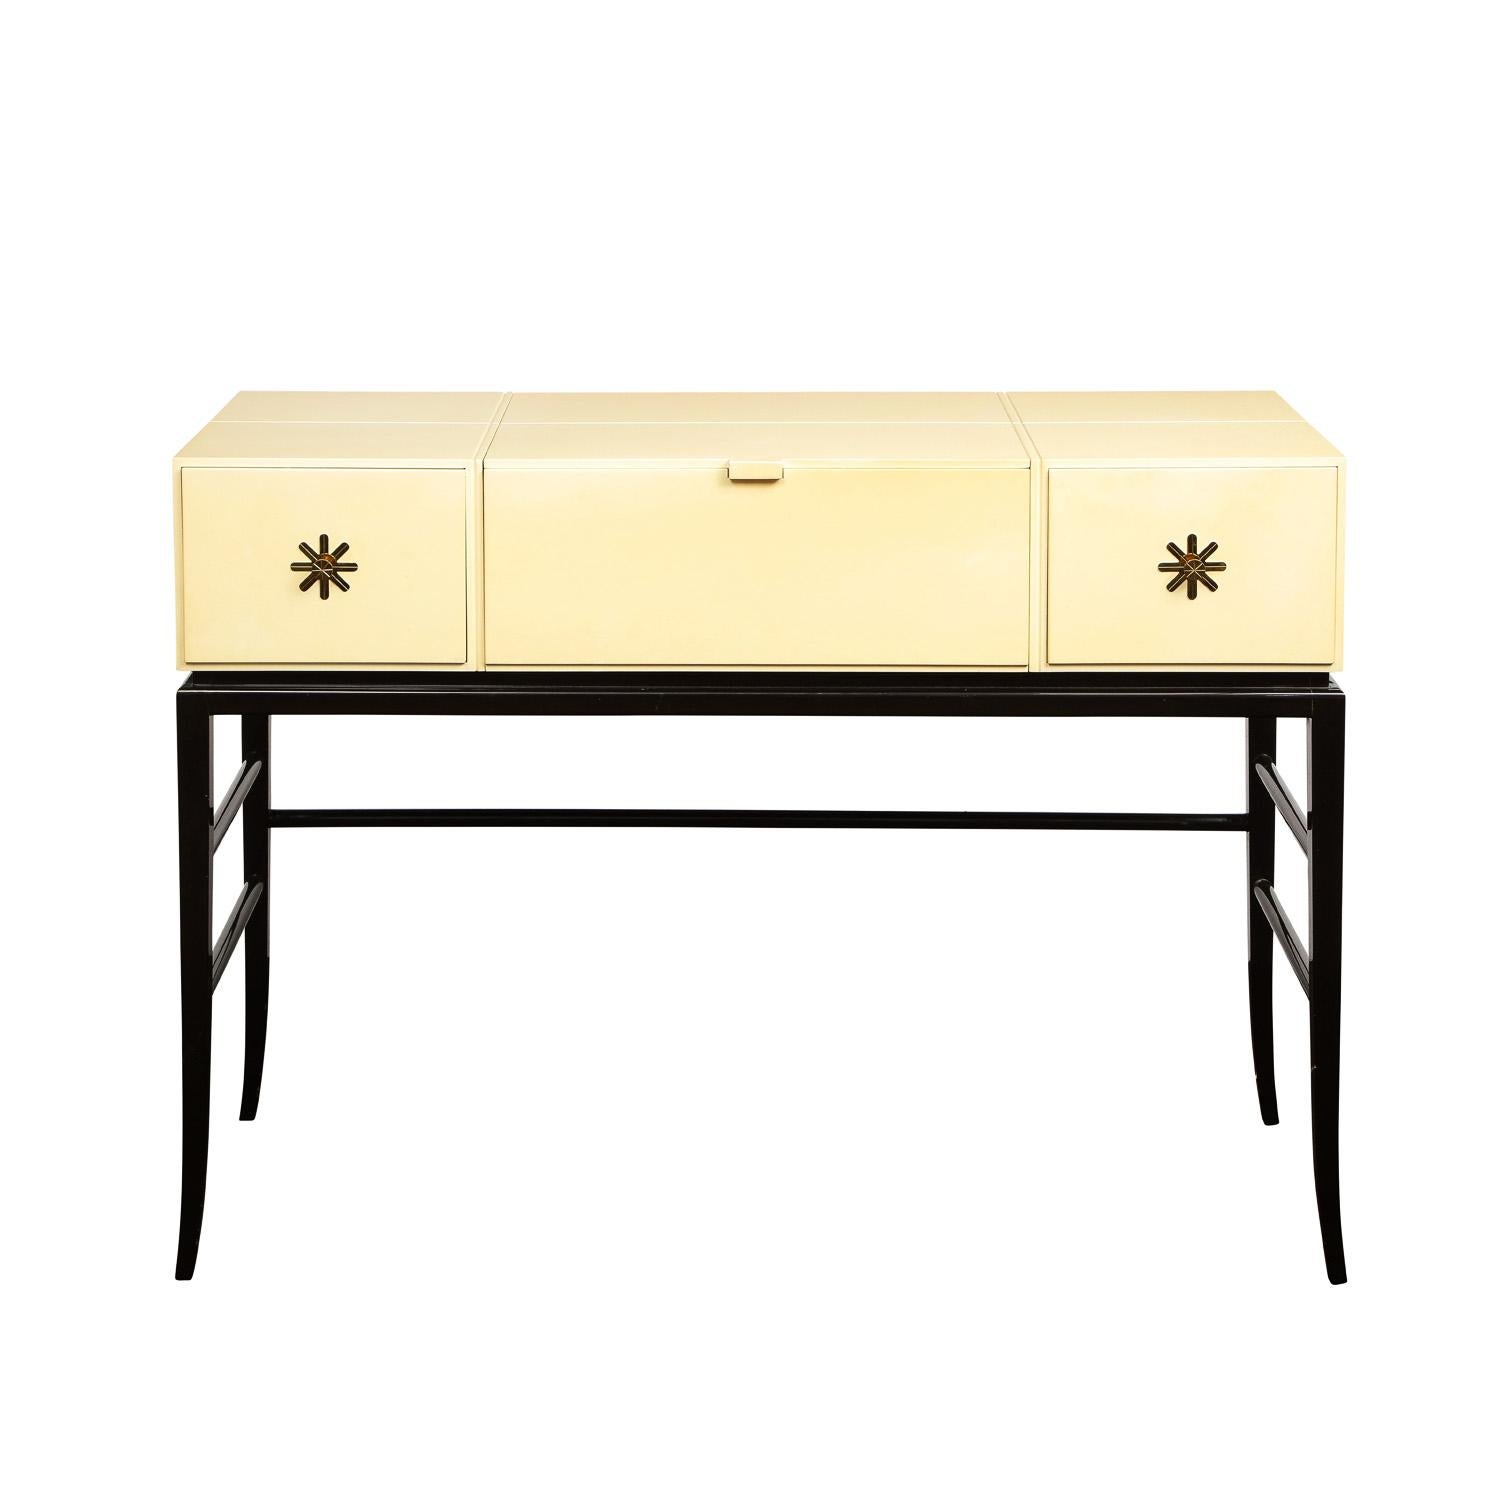 Elegant rare illuminated vanity with lift up top with concealed mirror and light underneath and drop down front, in ivory and black lacquer, with iconic etched brass pulls on drawers by Tommi Parzinger for Parzinger Originals, American 1960's. This